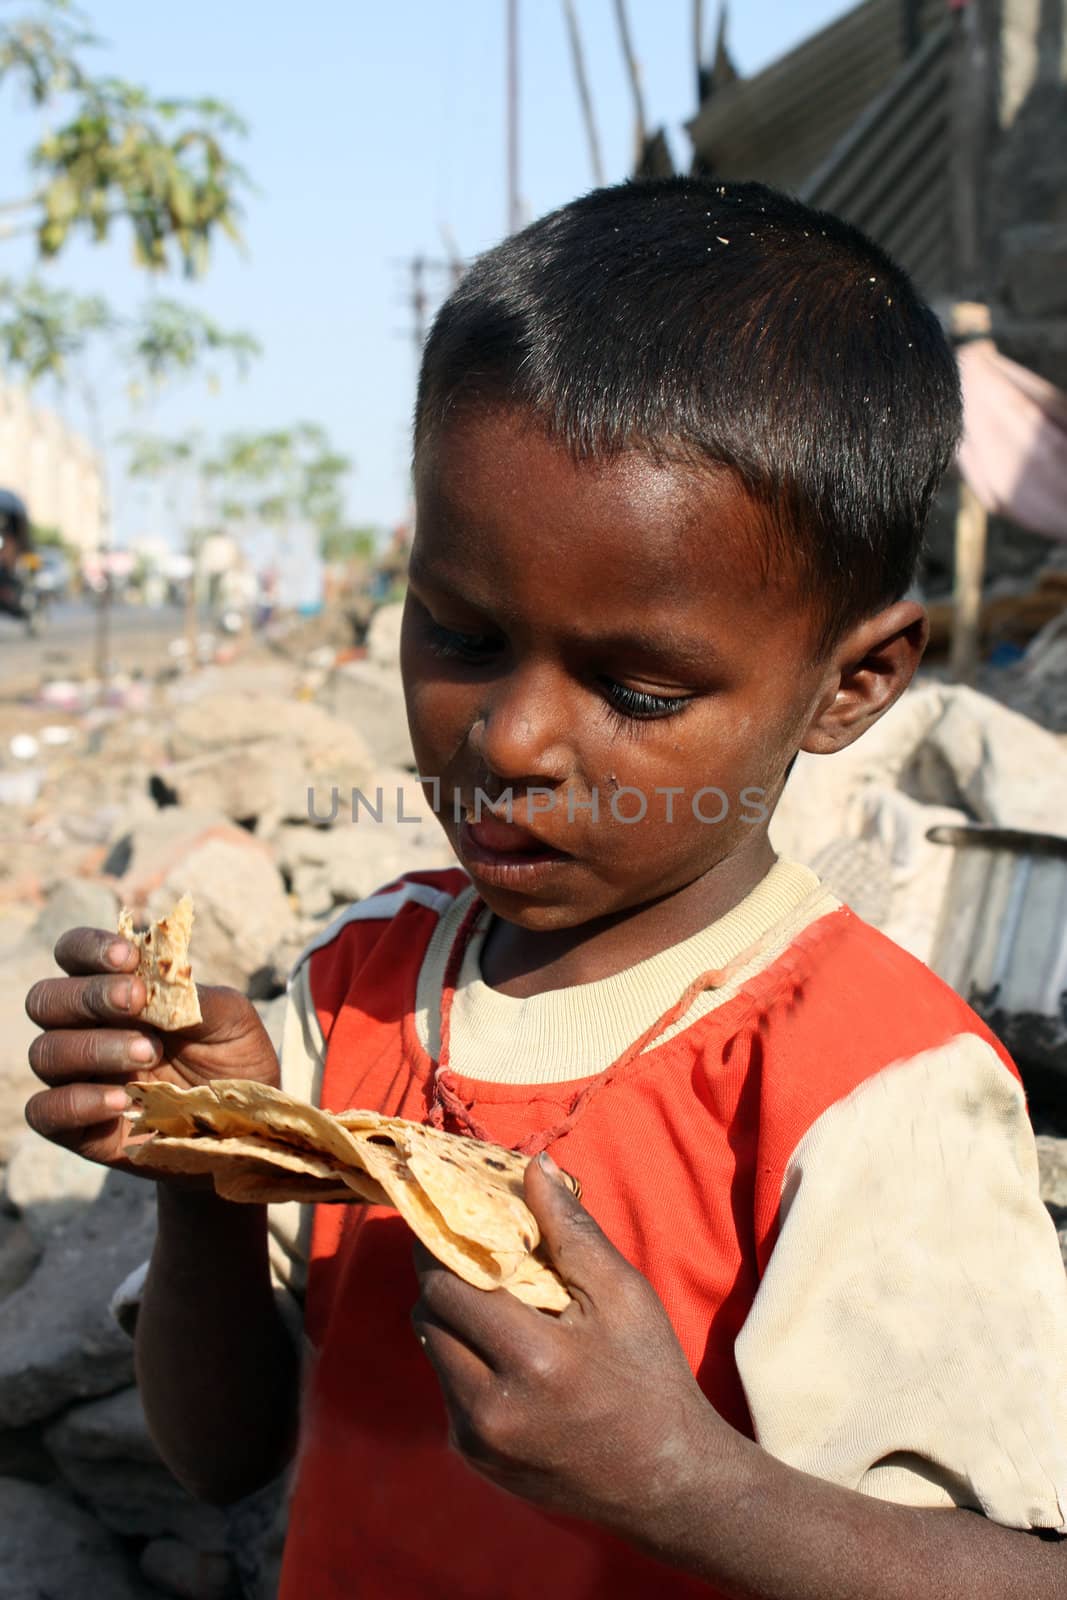 A poor beggar boy from India looking at the stale bread he is eating.